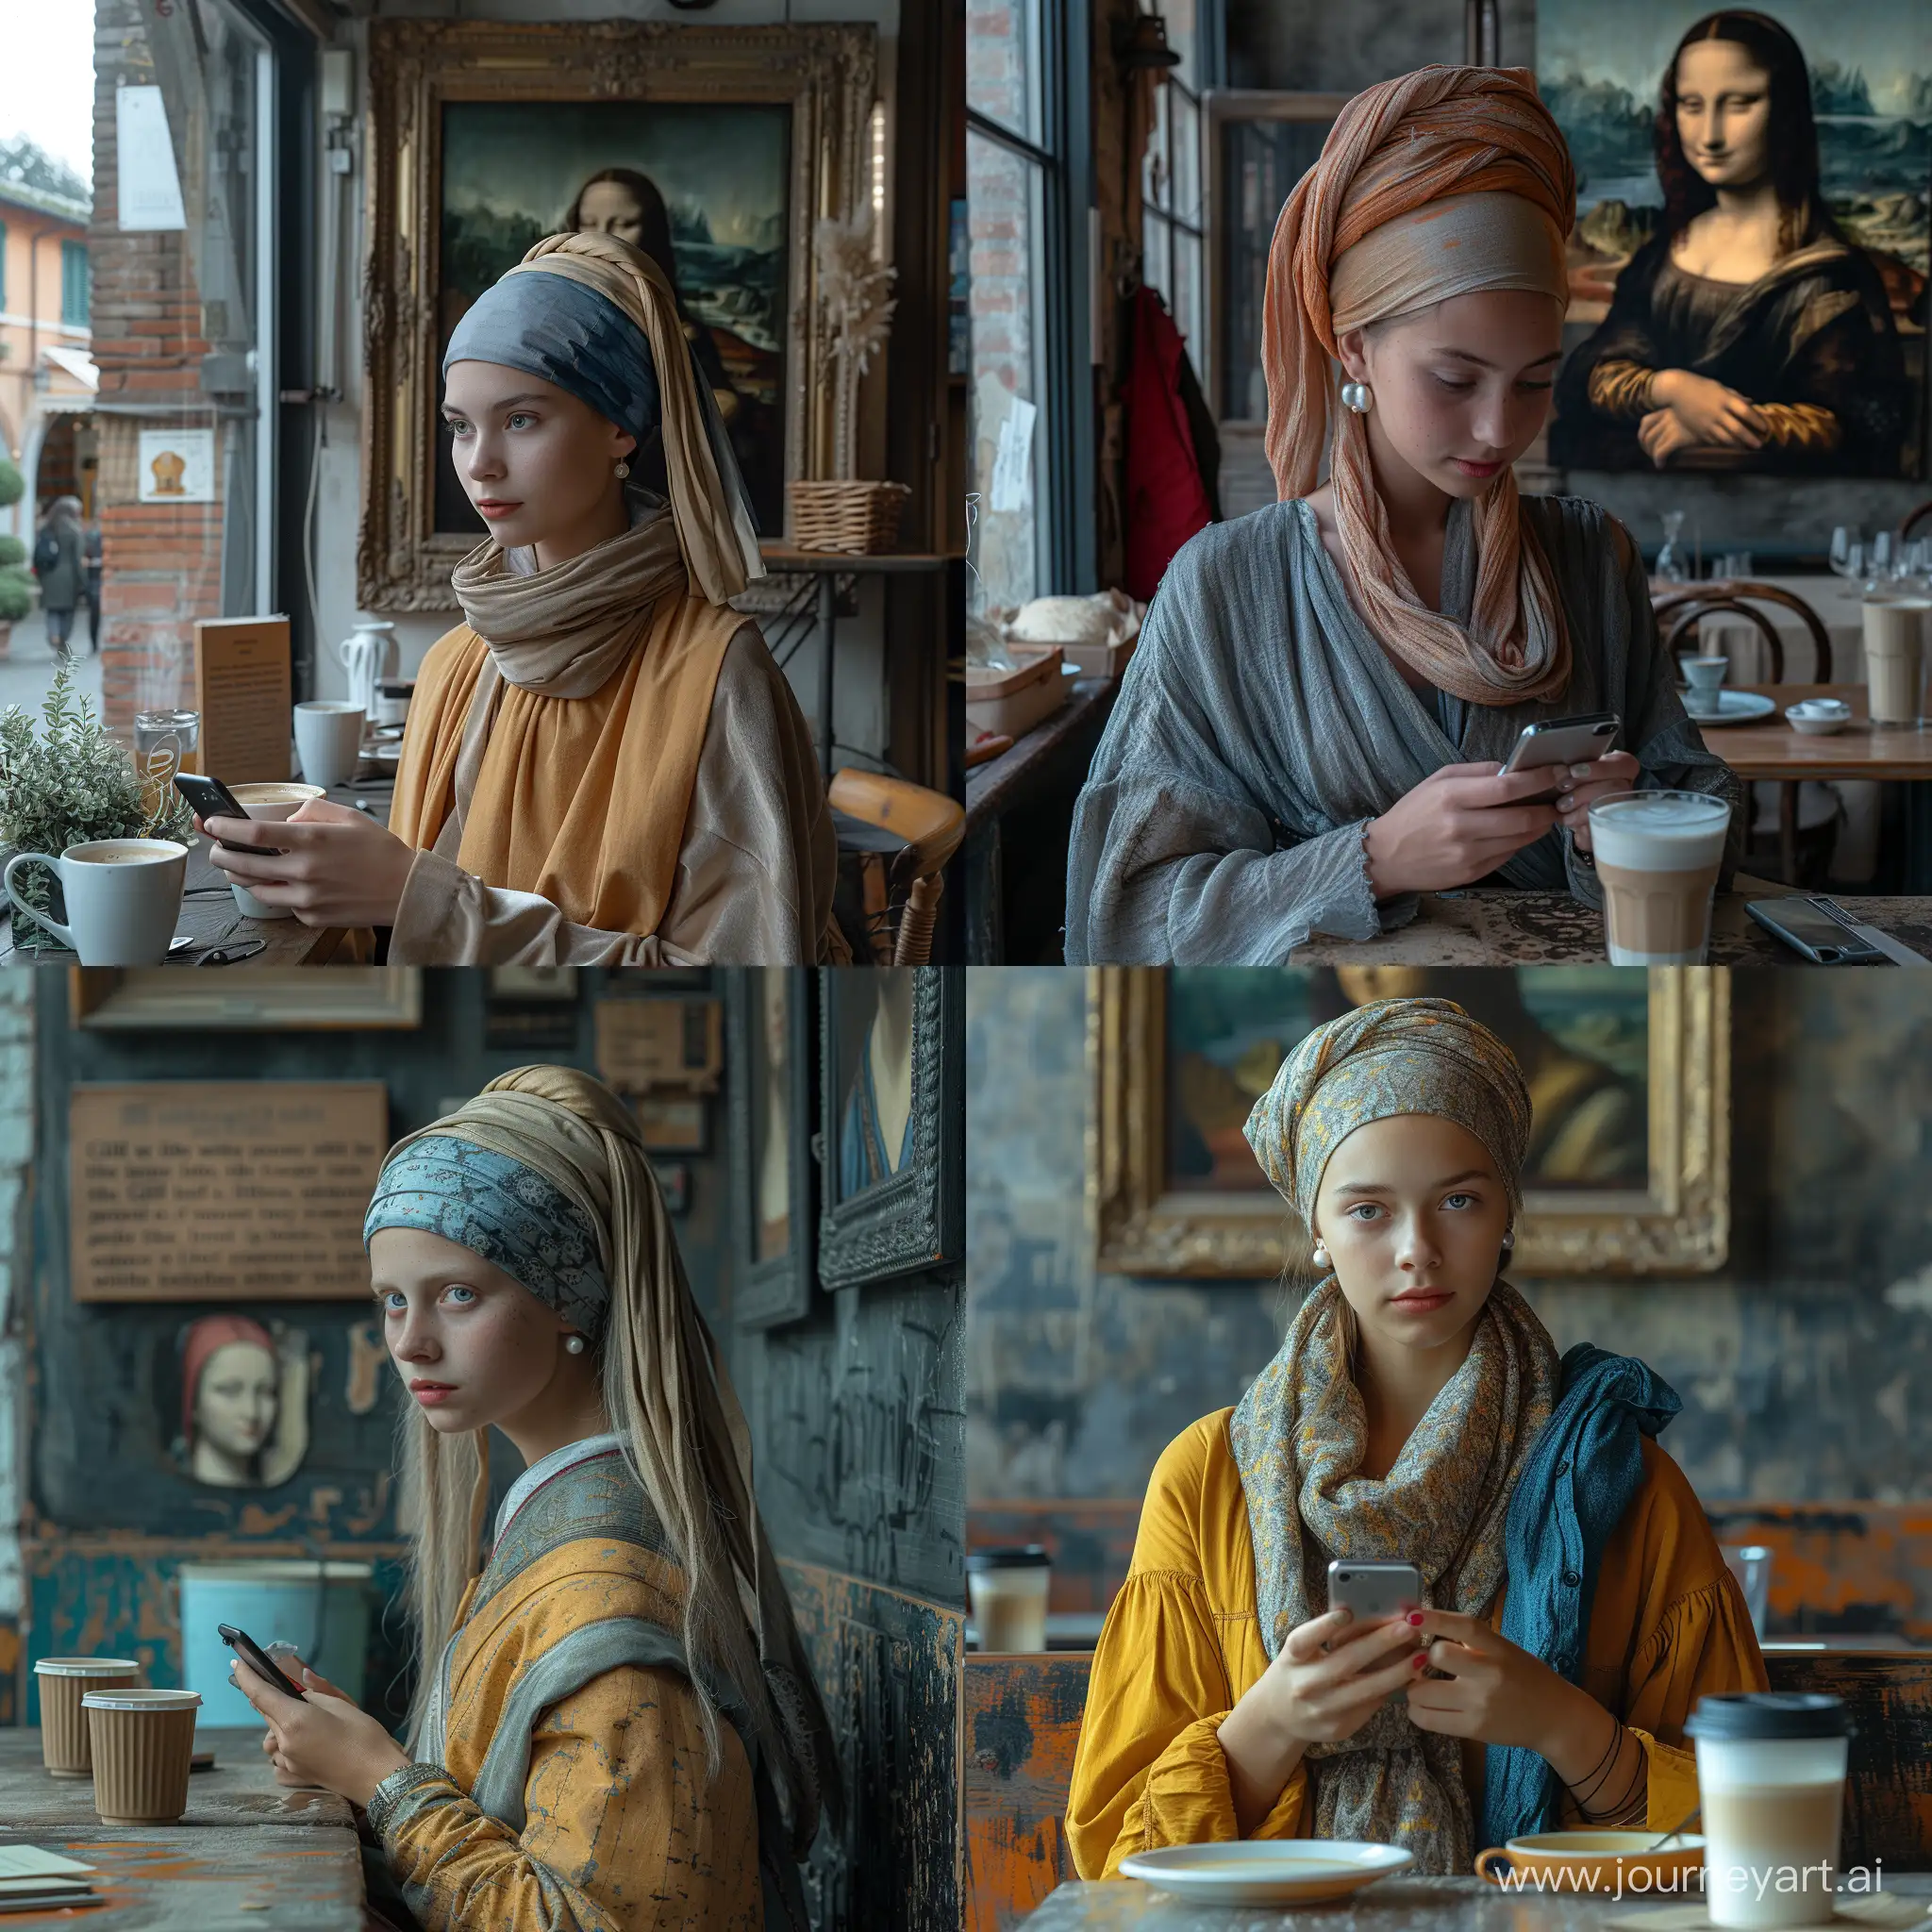 Modern-Italian-Cafe-Scene-Girl-with-a-Pearl-Earring-and-the-Mona-Lisa-Inspired-Digital-Photograph